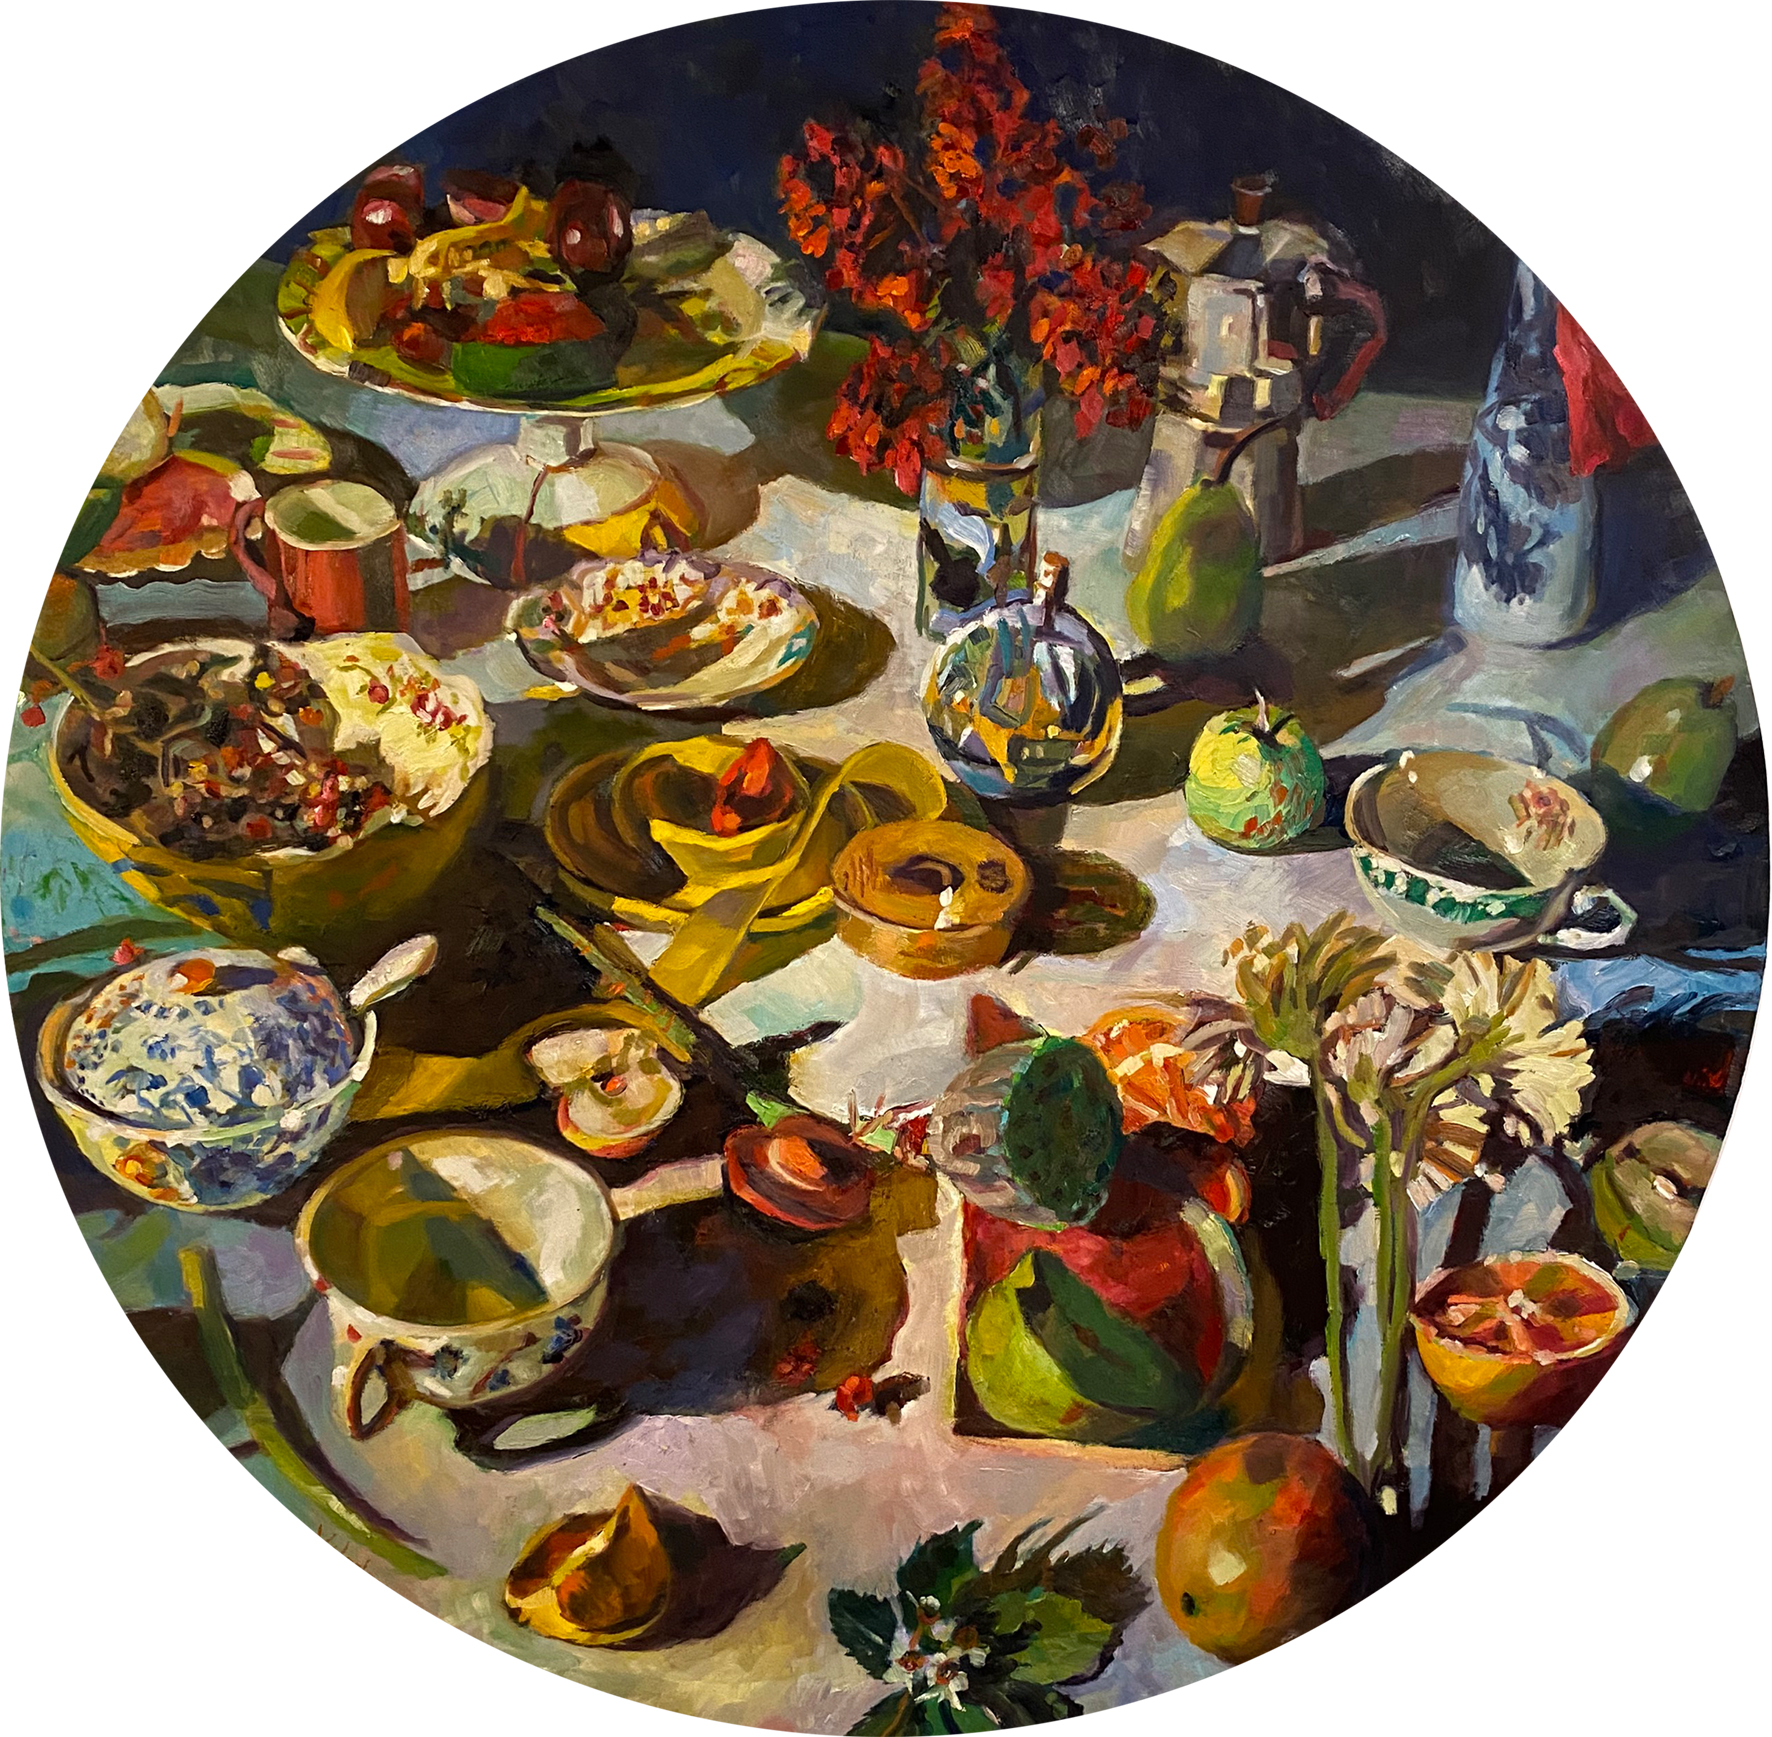 Rosemary Valadon 'Almost Everything' oil on wood panel 122 x 122cm